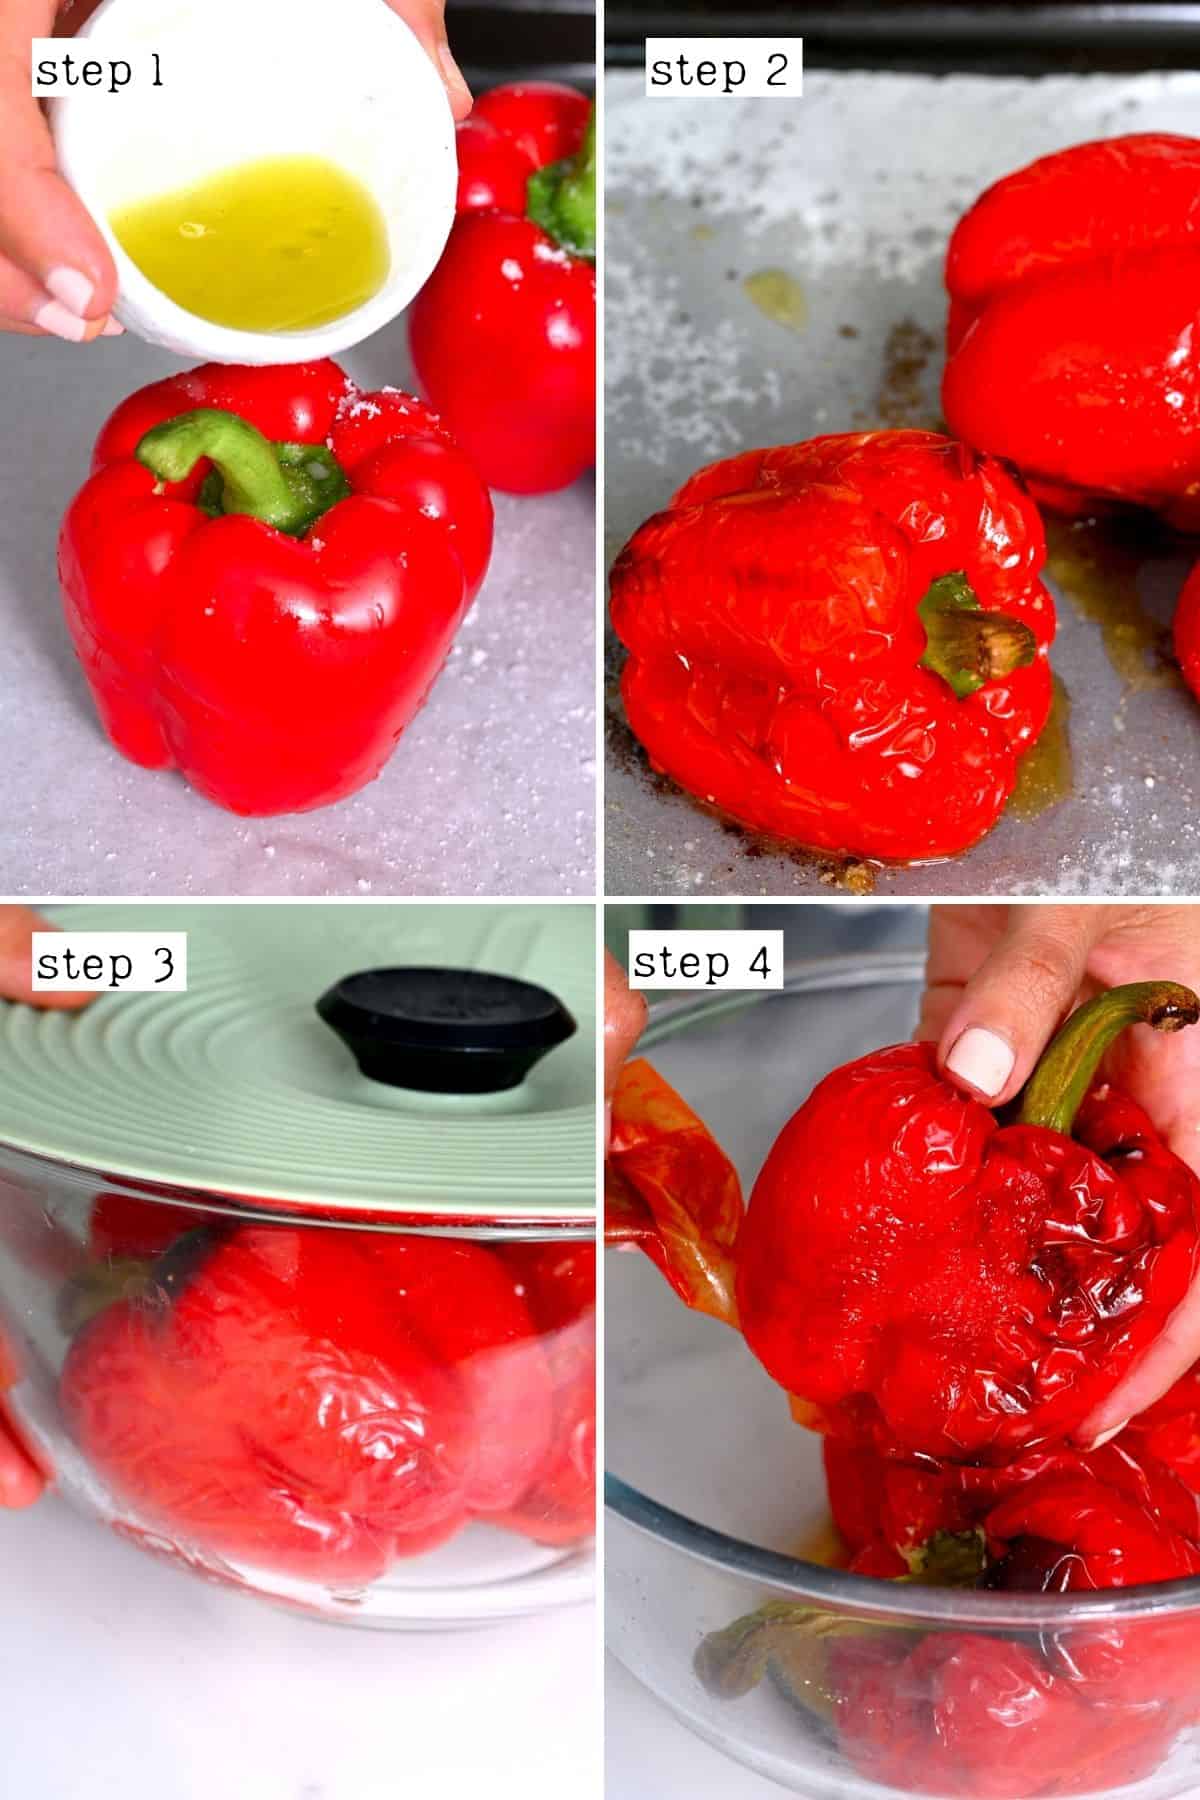 Steps for roasting red peppers